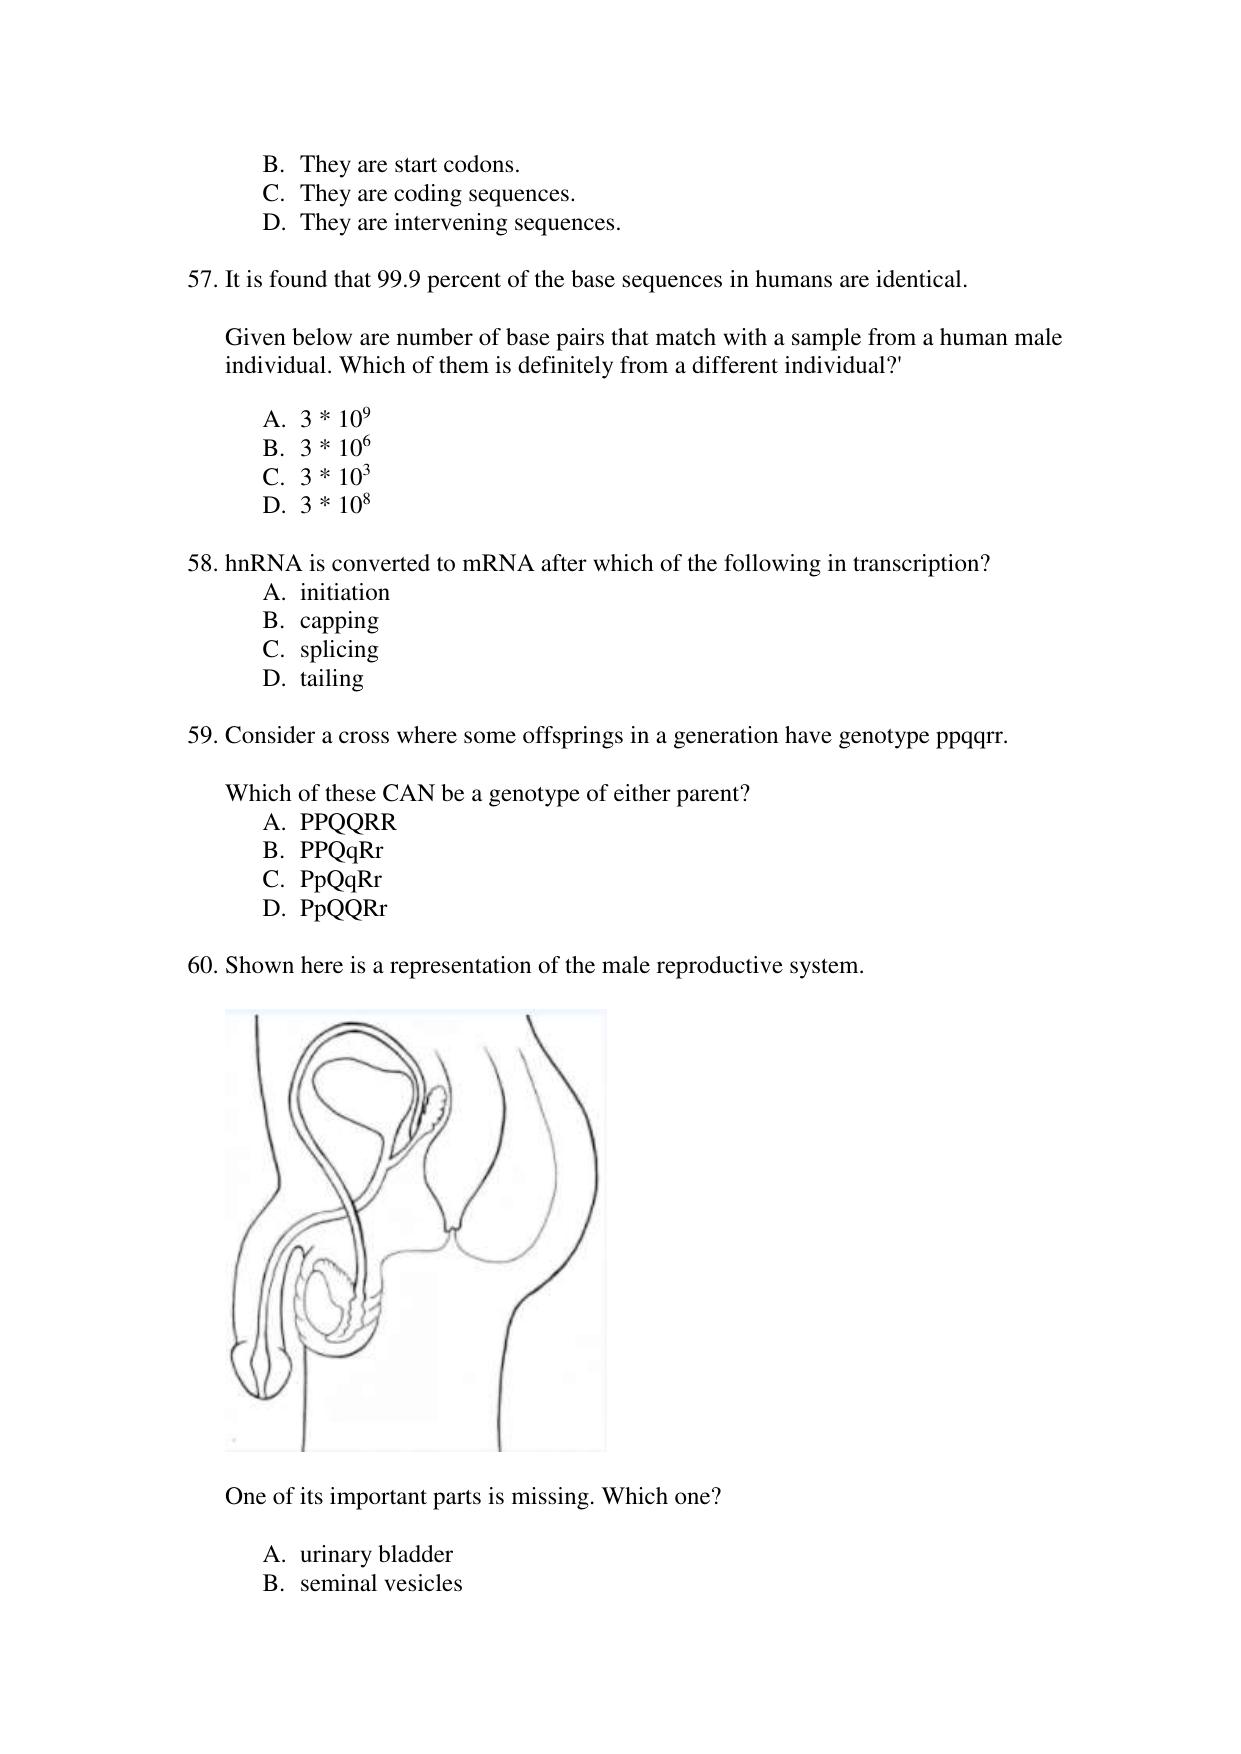 CBSE Class 12 Biology Term 1 Practice Questions 2021-22 - Page 18